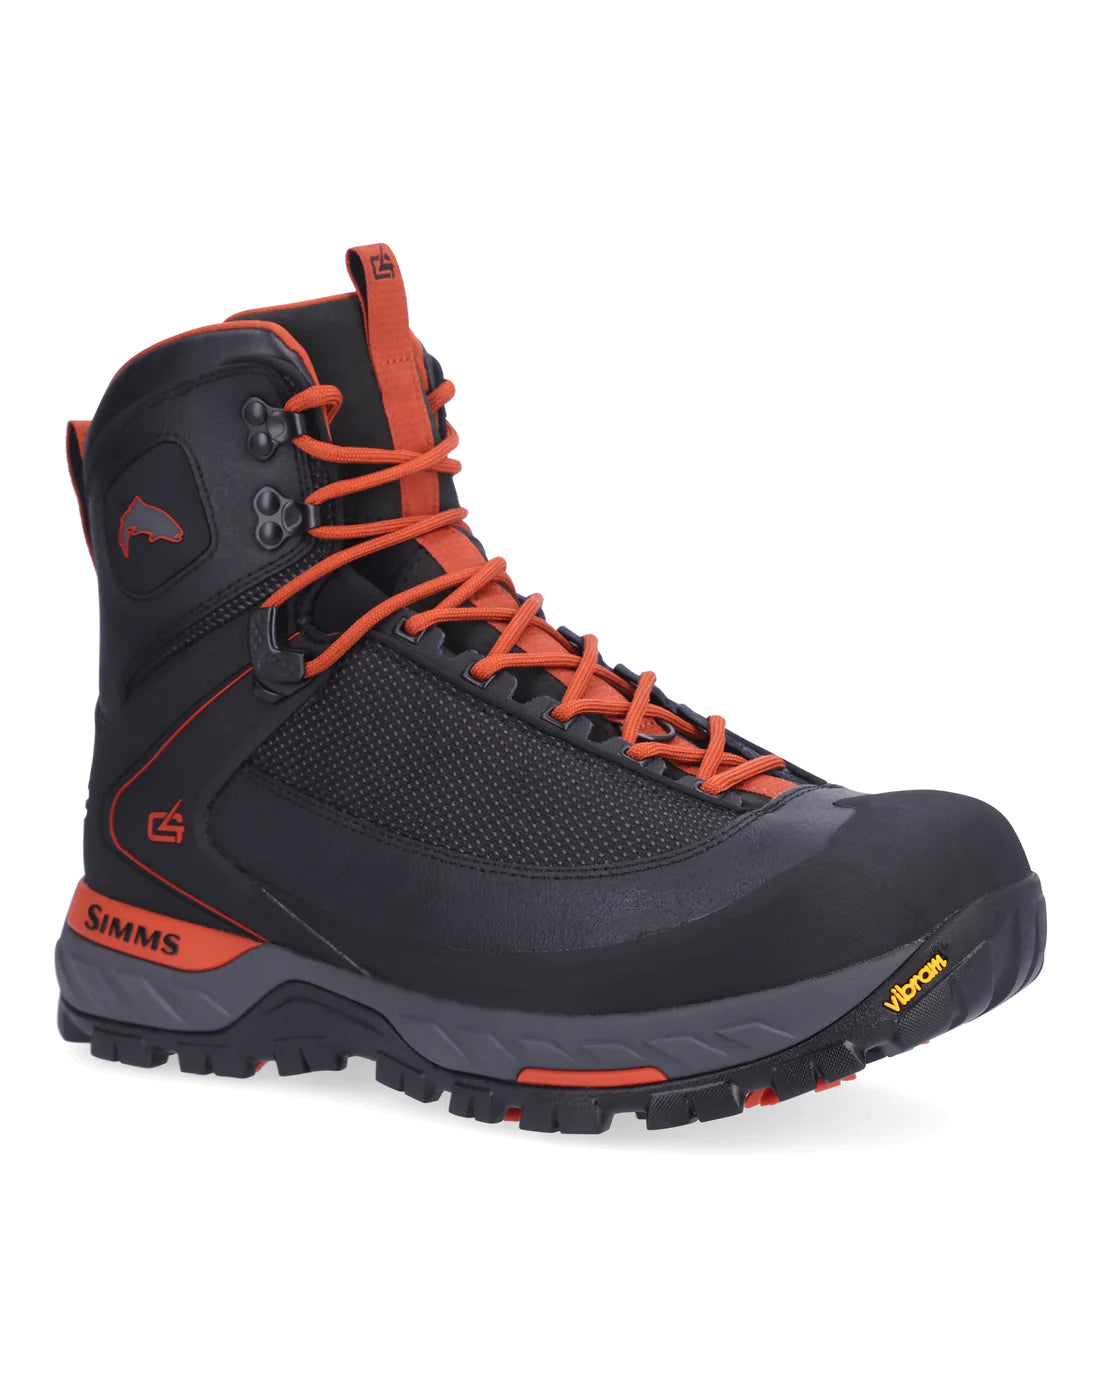 Simms G4 Pro Powerlock Wading Boot - US11 / CARBON - Mansfield Hunting & Fishing - Products to prepare for Corona Virus